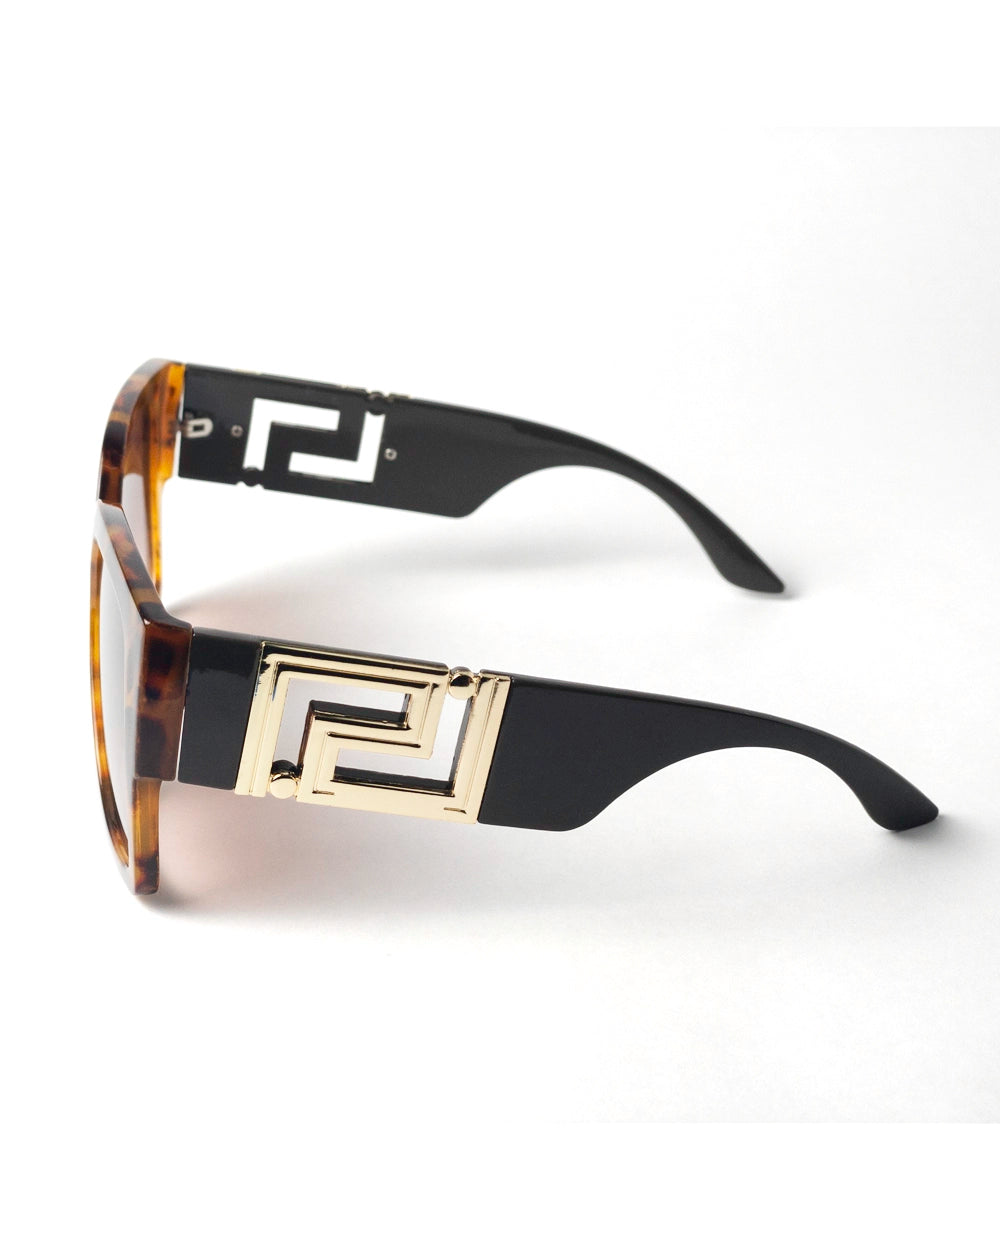 Luxury Mirror Lens Vintage Square Sunglasses: Sun Protection with Style